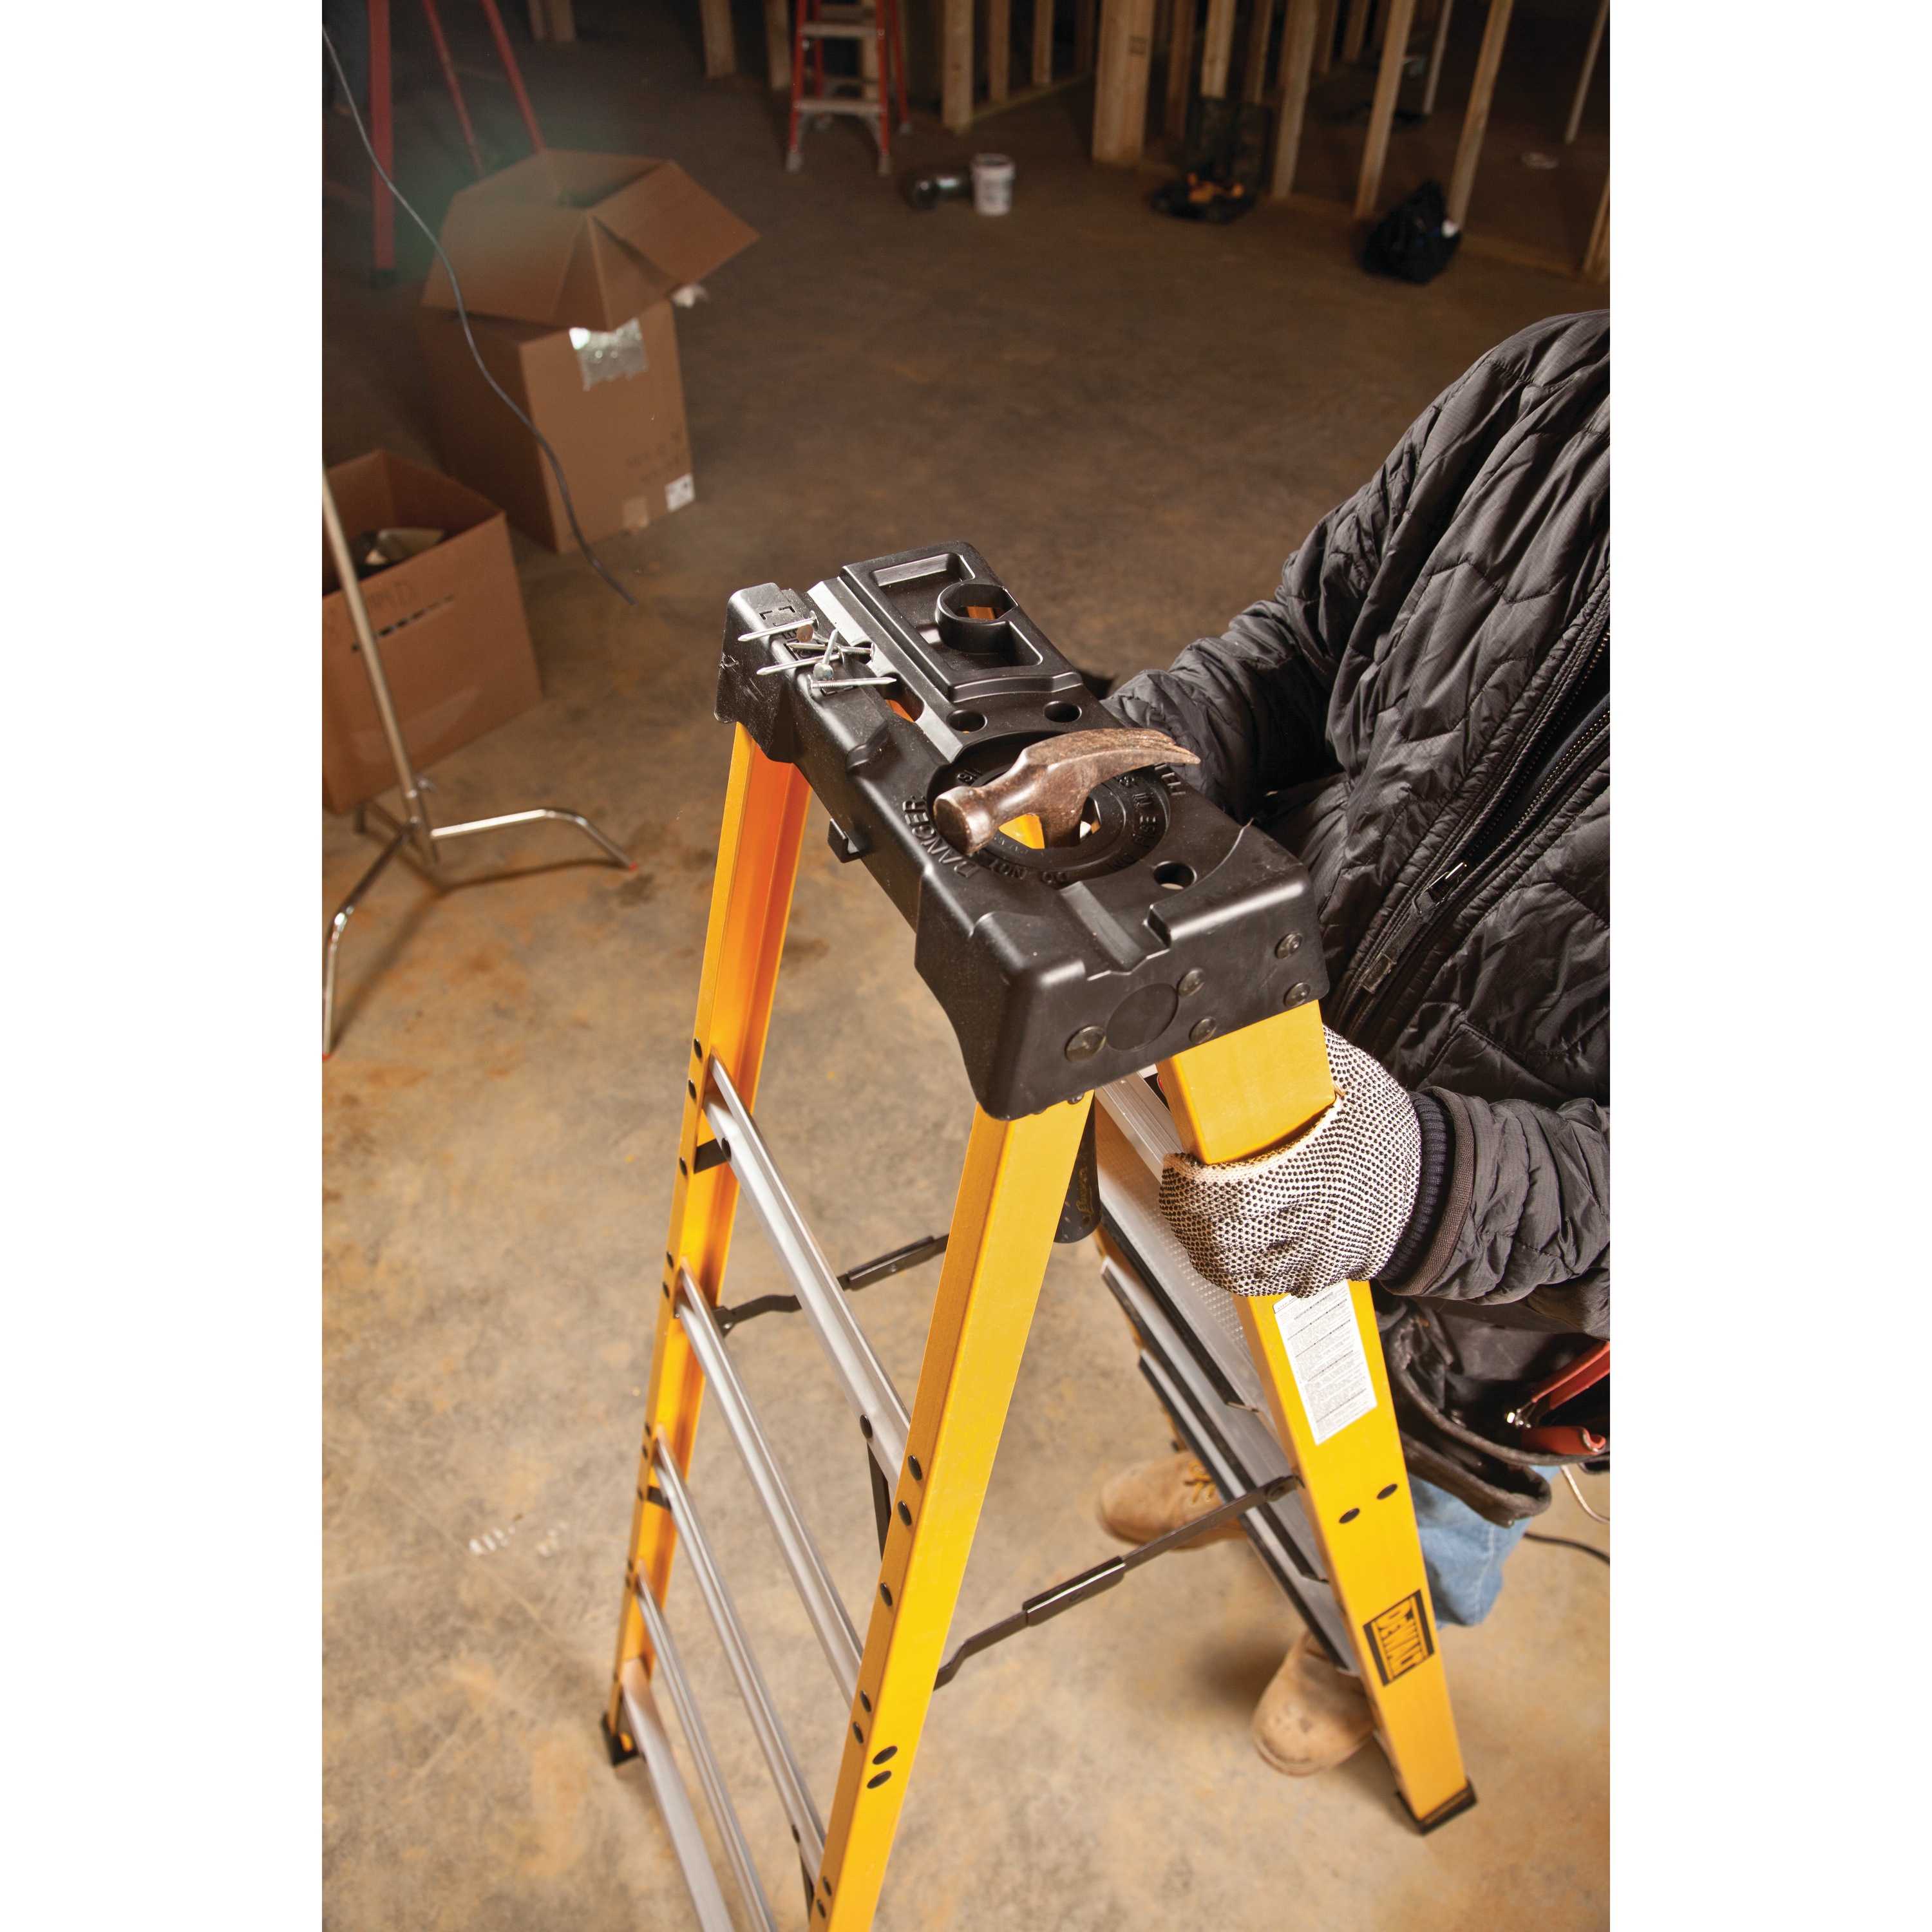 Durable top feature of 12 foot Fiberglass Step Ladder 300 pound Load Capacity.